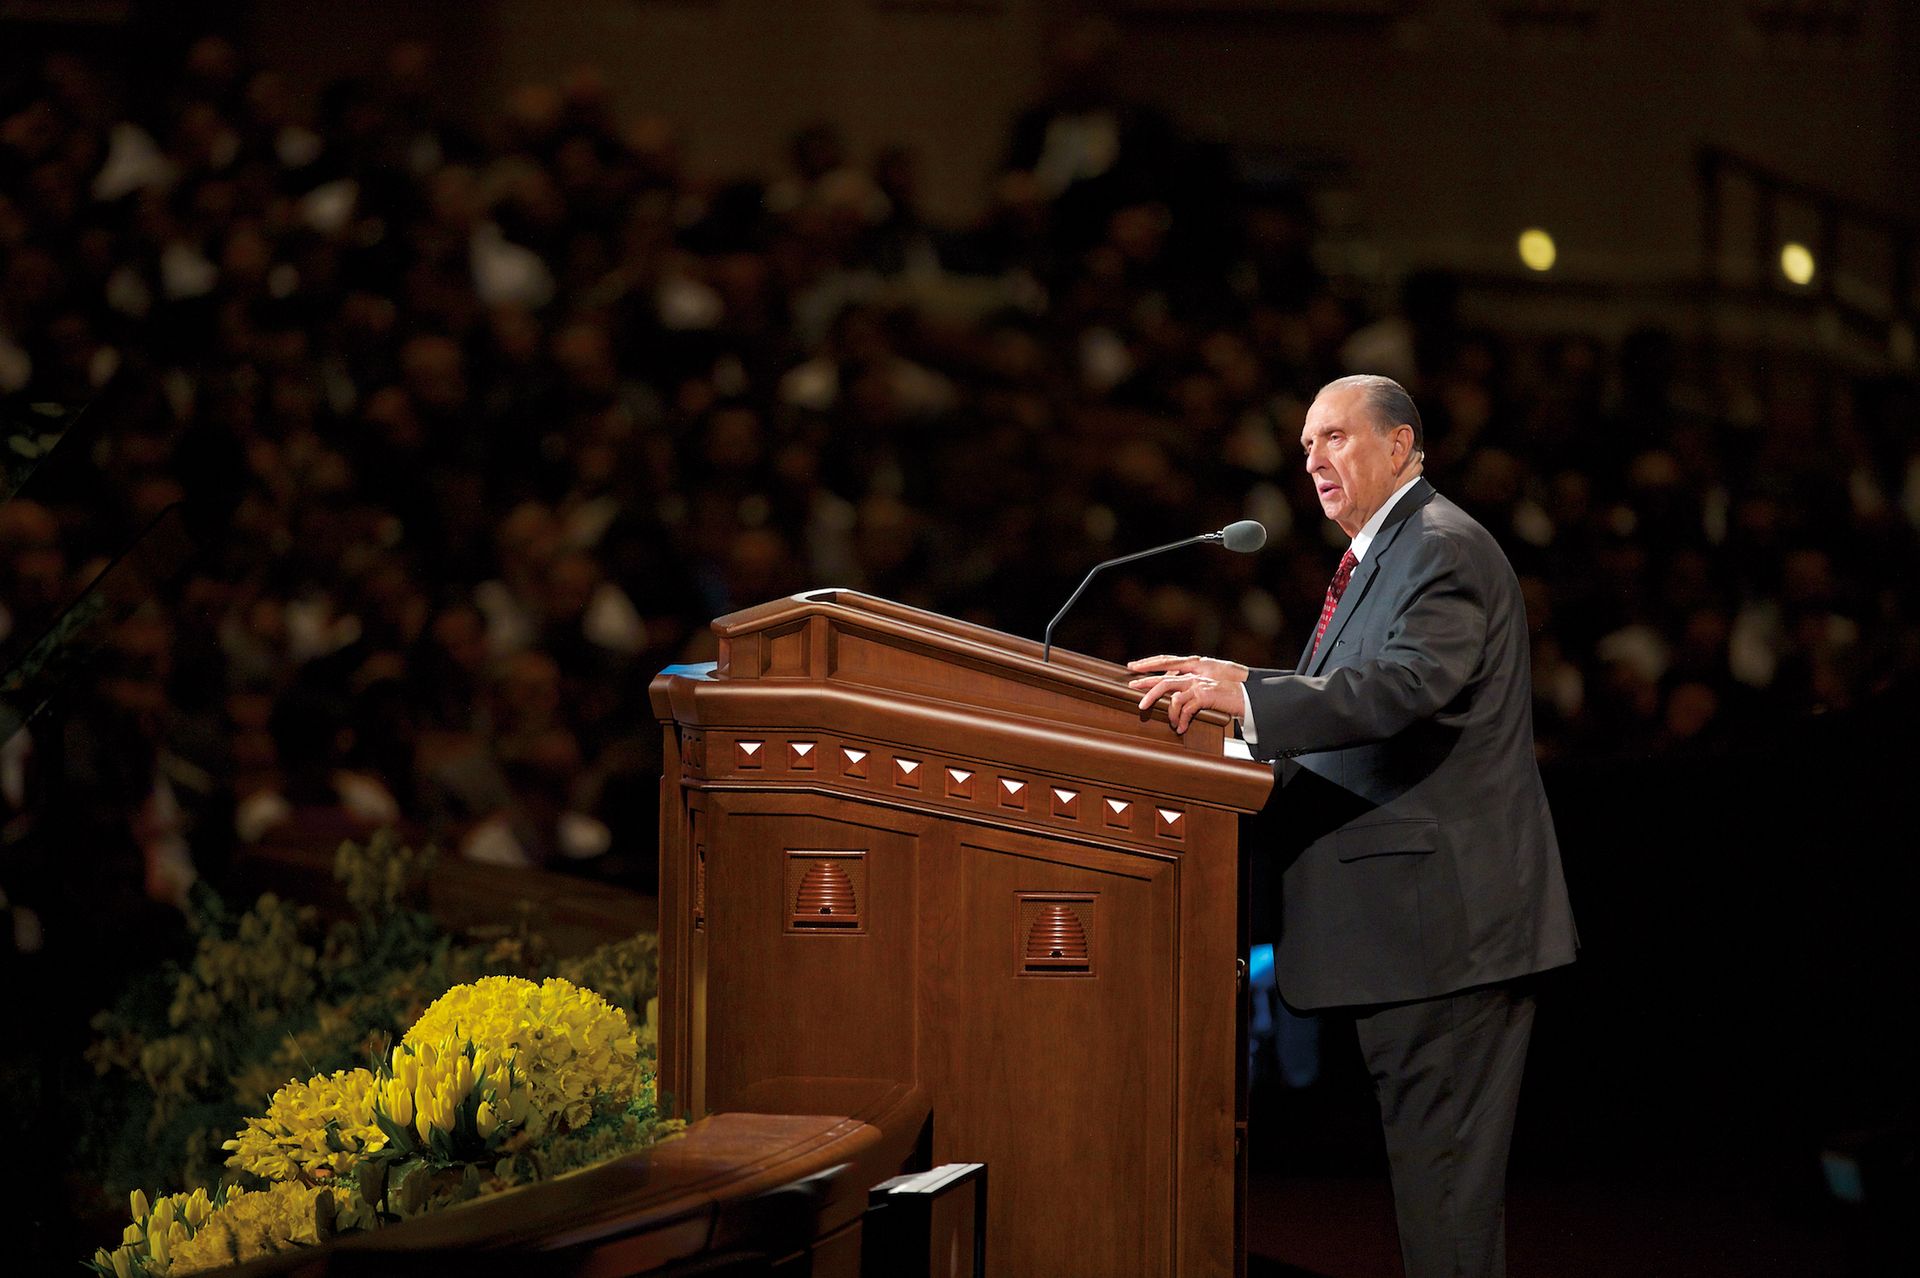 Thomas S. Monson speaking to the congregation during general conference.